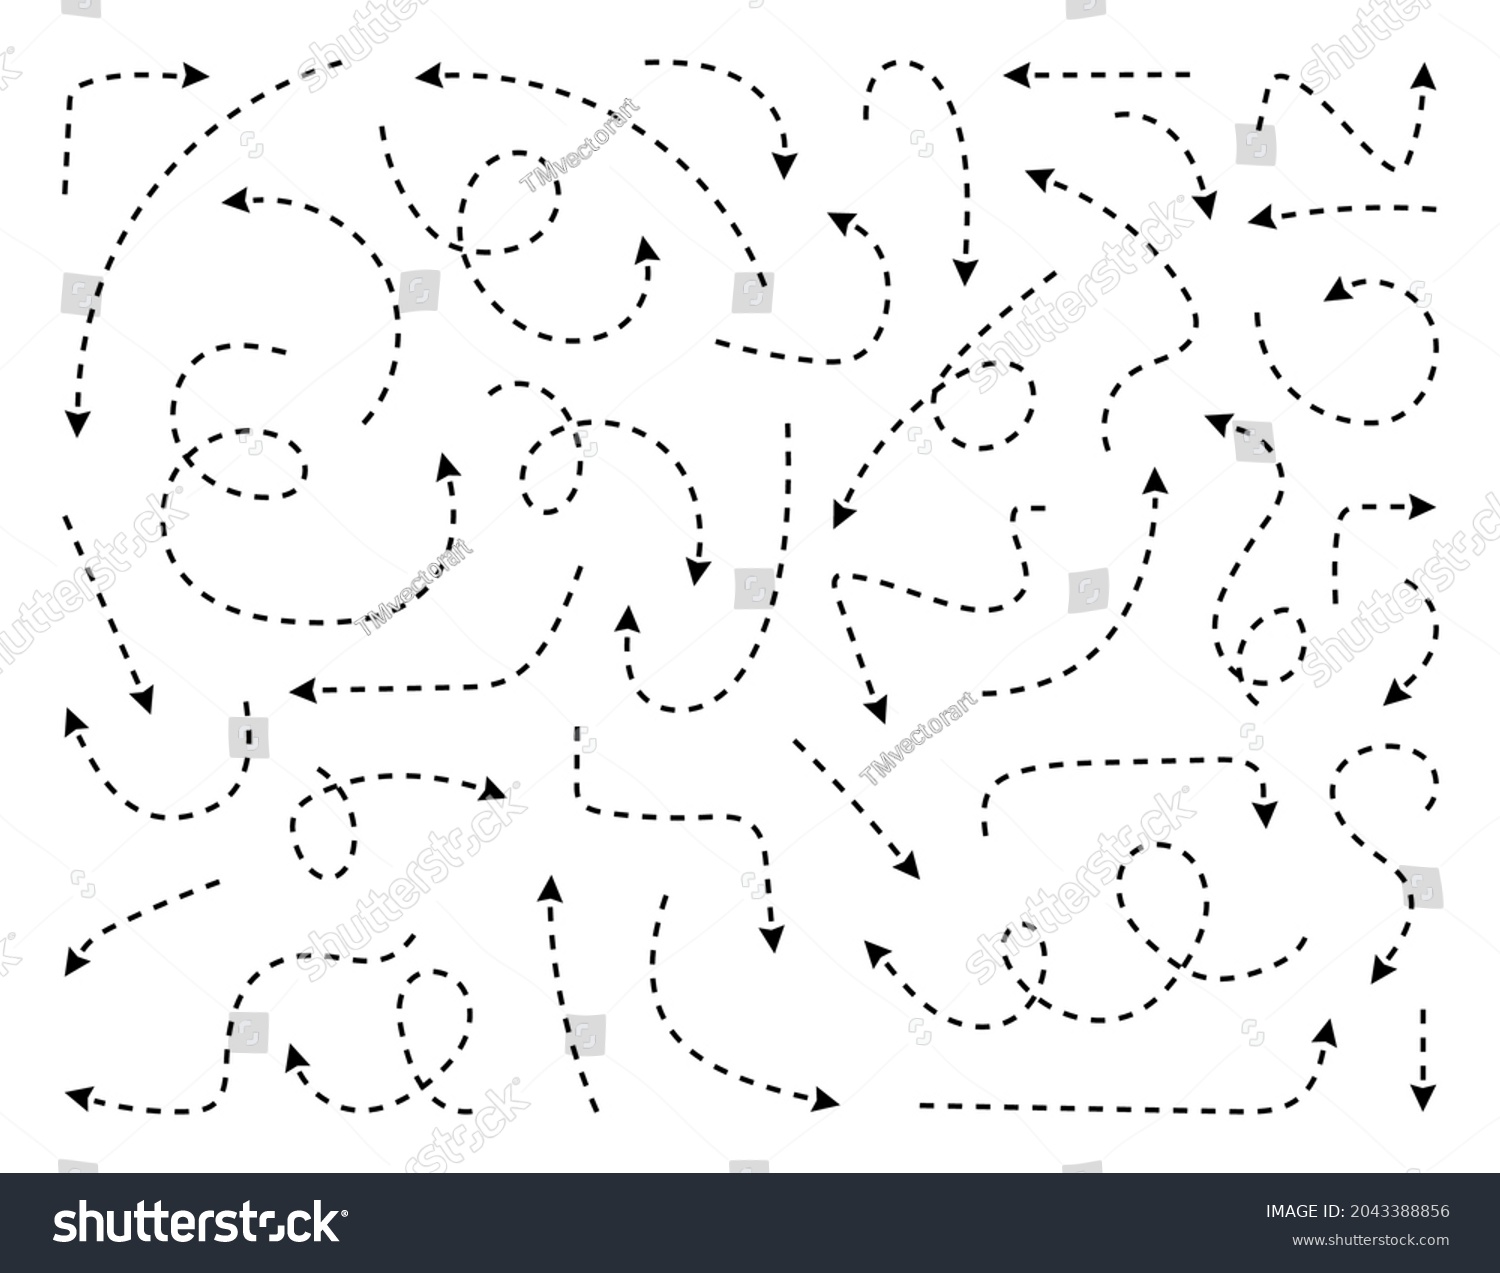 SVG of Hand drawn dotted arrows set. Sketch curved dashed arrows design. Arrow handmade. Doodle arrows of varios shapes and directions. svg